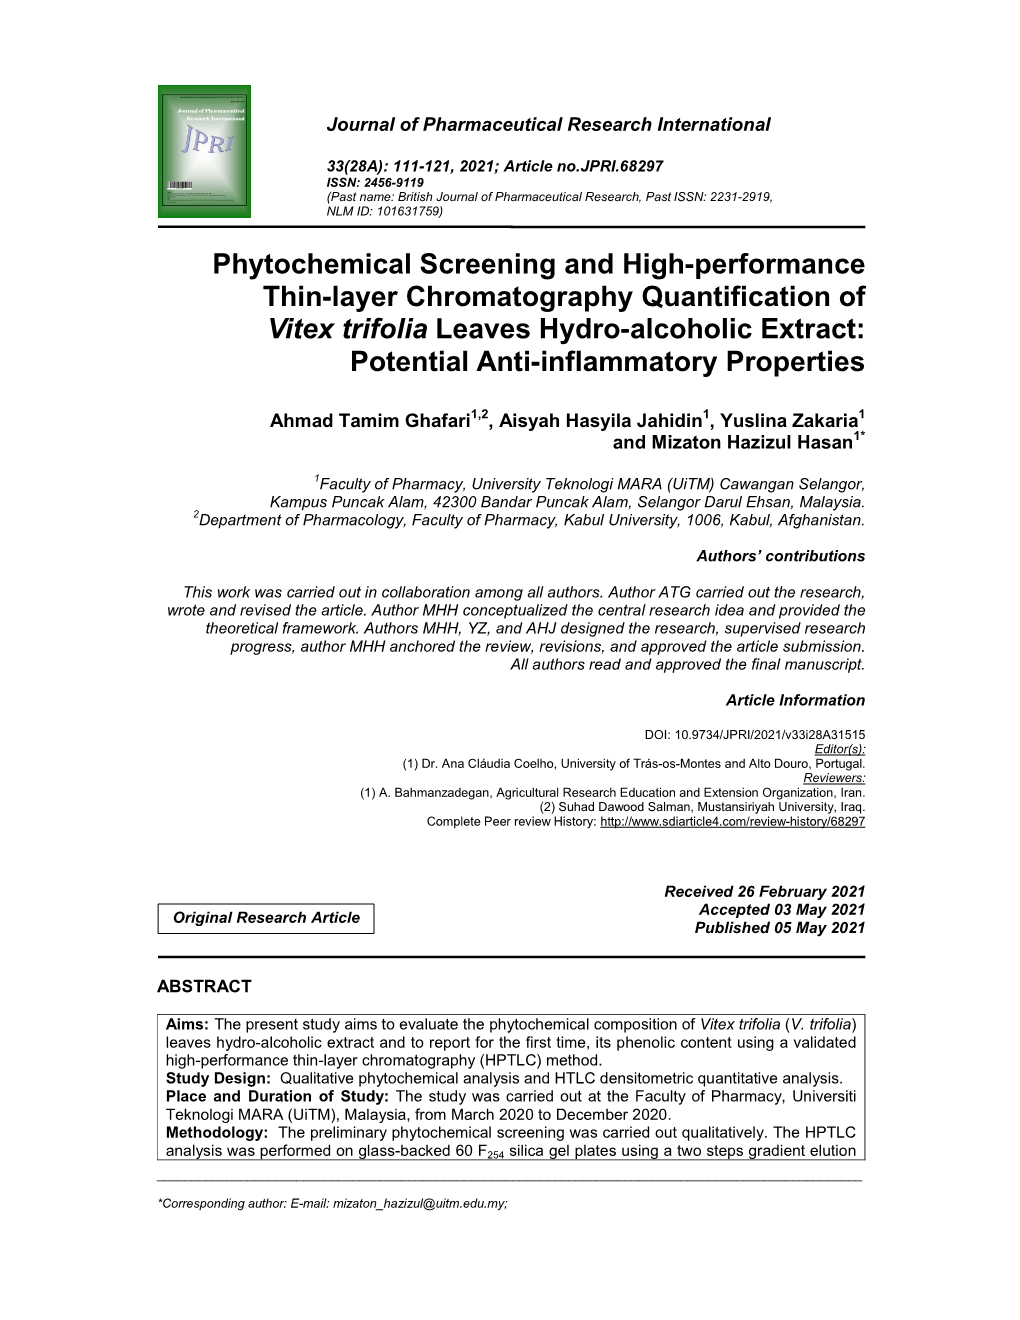 Phytochemical Screening and High-Performance Thin-Layer Chromatography Quantification of Vitex Trifolia Leaves Hydro-Alcoholic